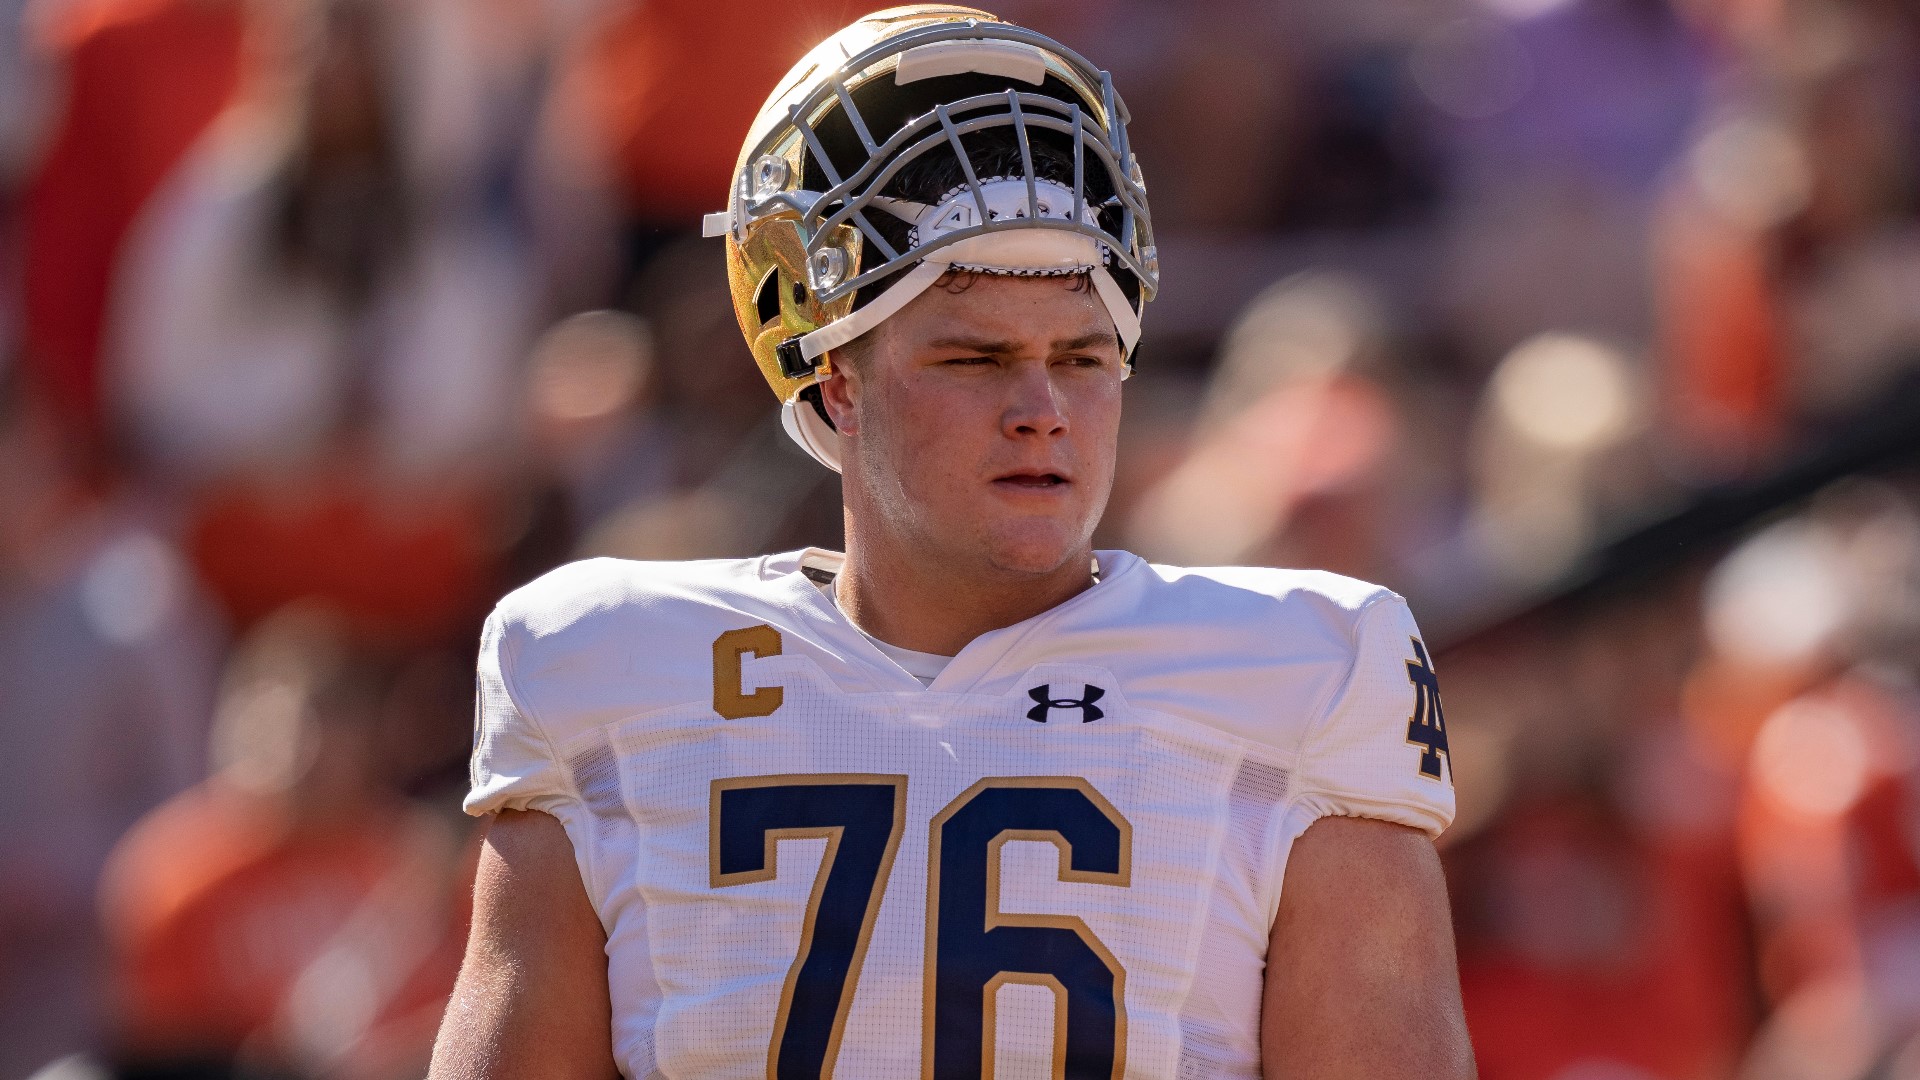 Former Totino-Grace star is projected to be a top-10 draft pick in April's the NFL Draft.